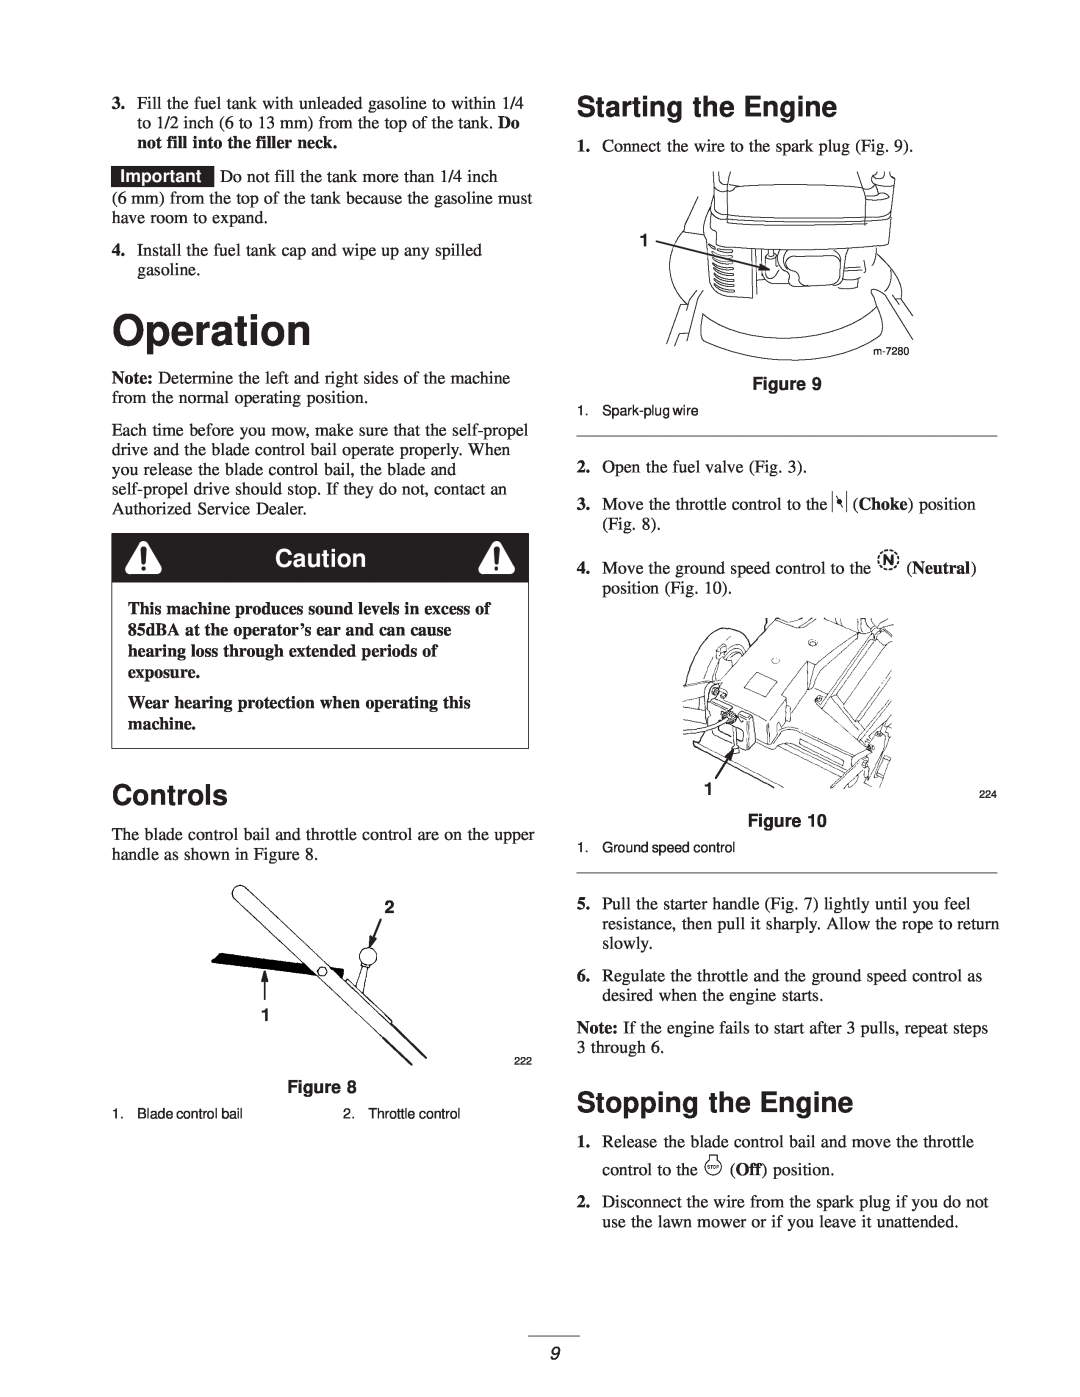 Exmark M216KASPC manual Operation, Controls, Starting the Engine, Stopping the Engine, Figure 